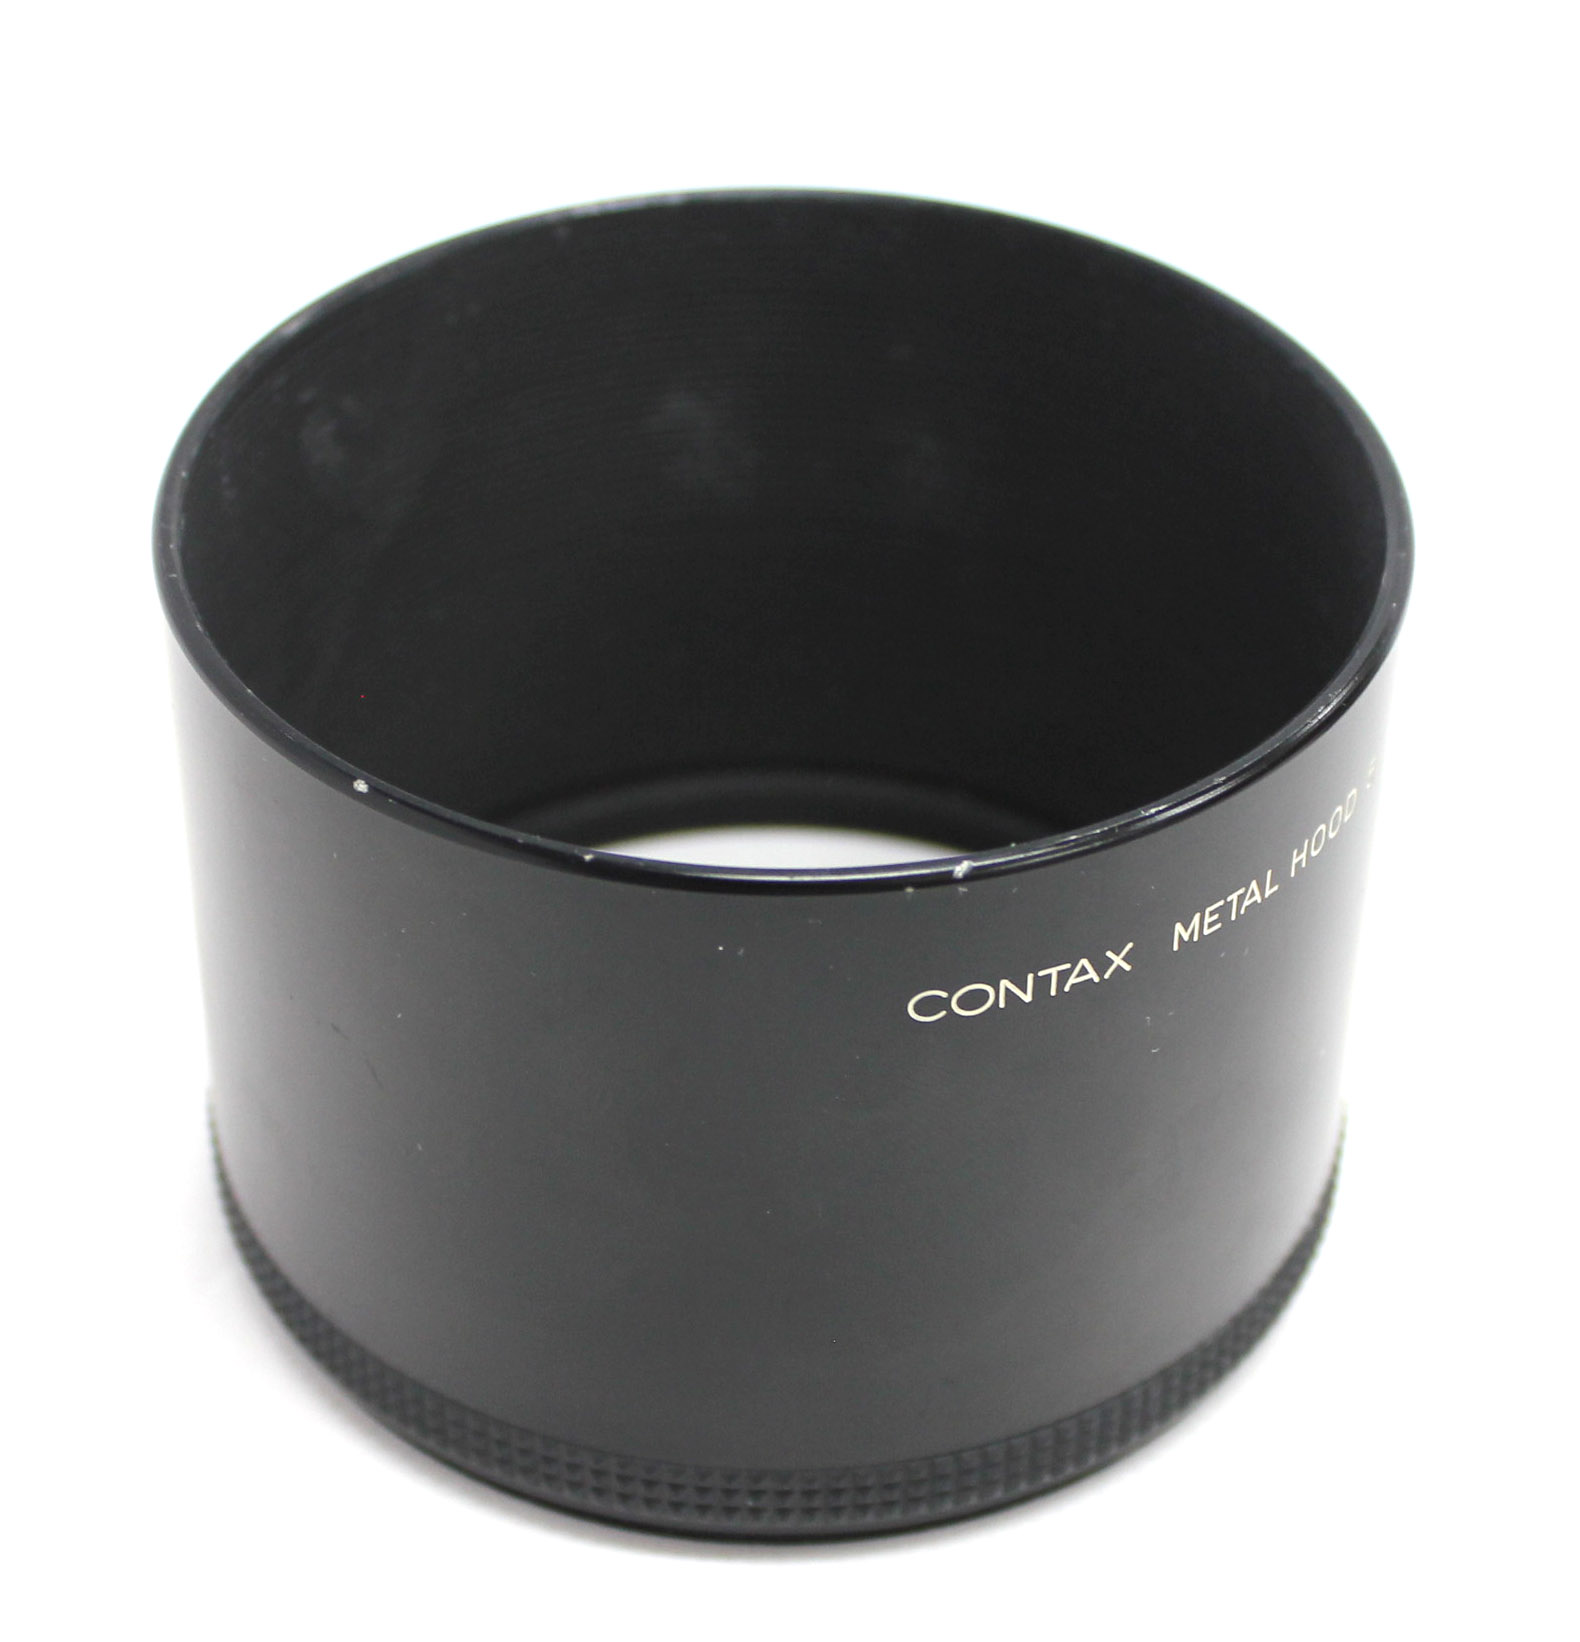  Contax Metal Hood 5 with Gelatine Filter Holder from Japan Photo 2